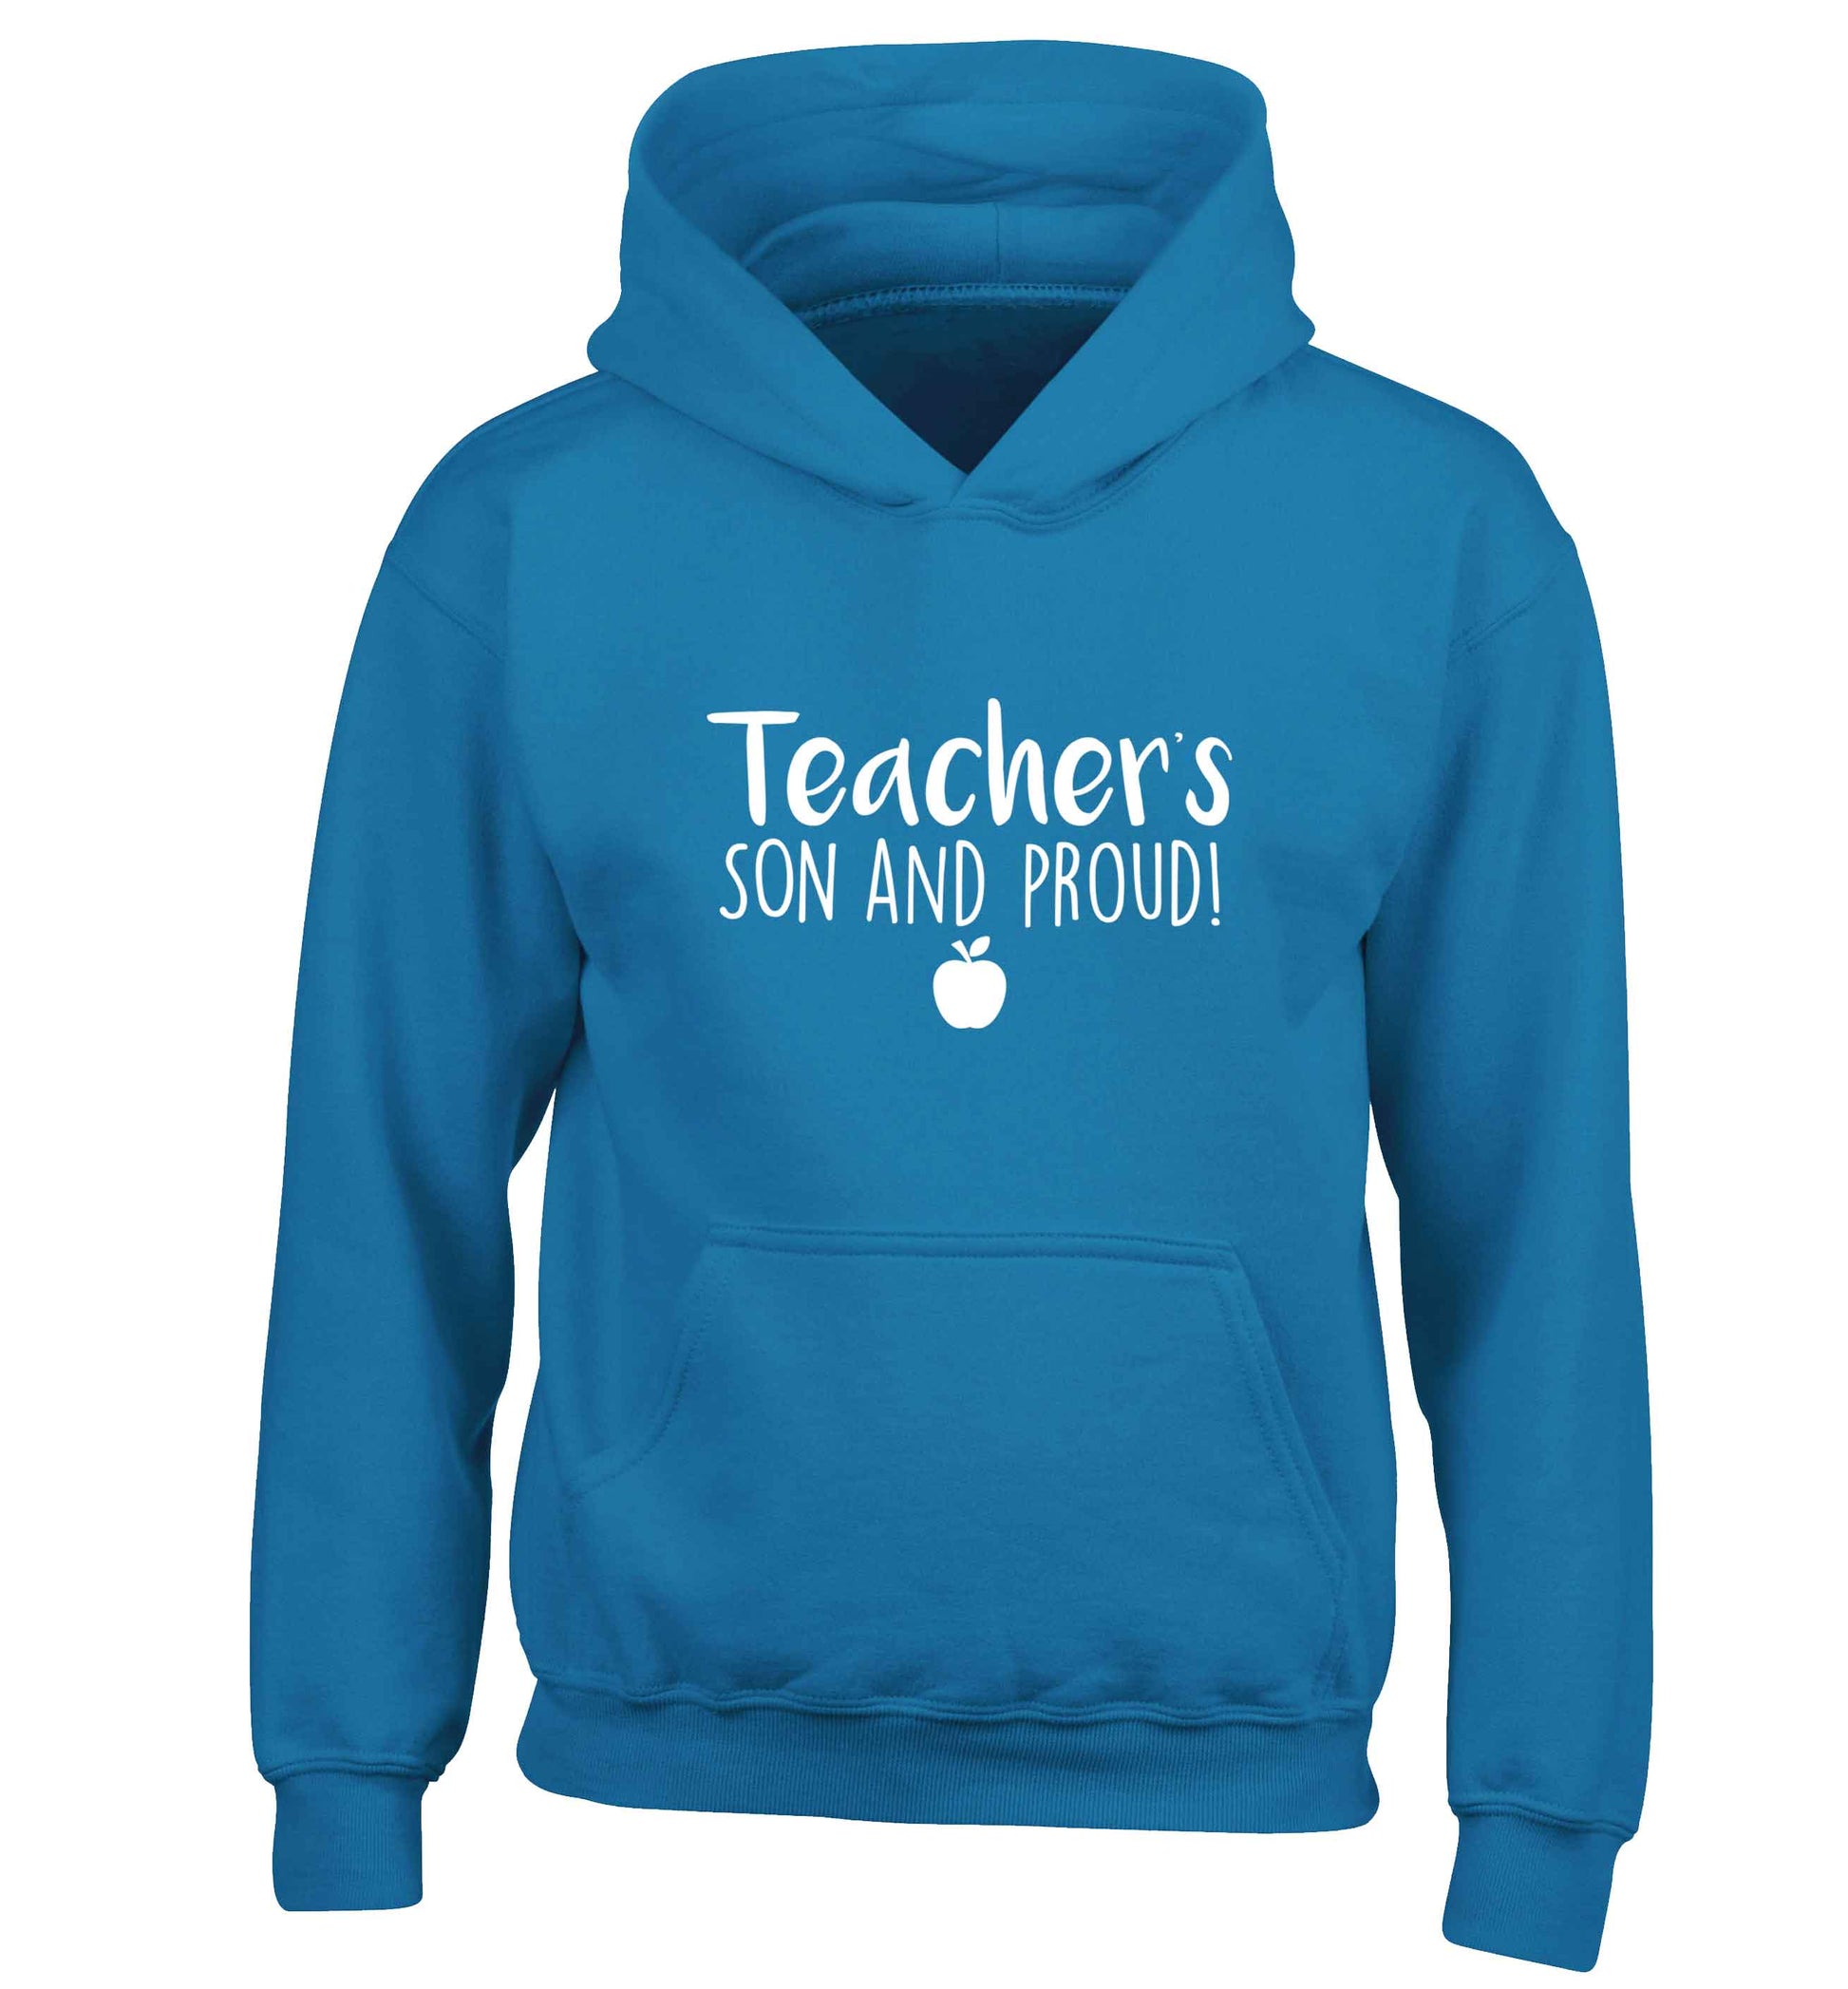 Teachers son and proud children's blue hoodie 12-13 Years